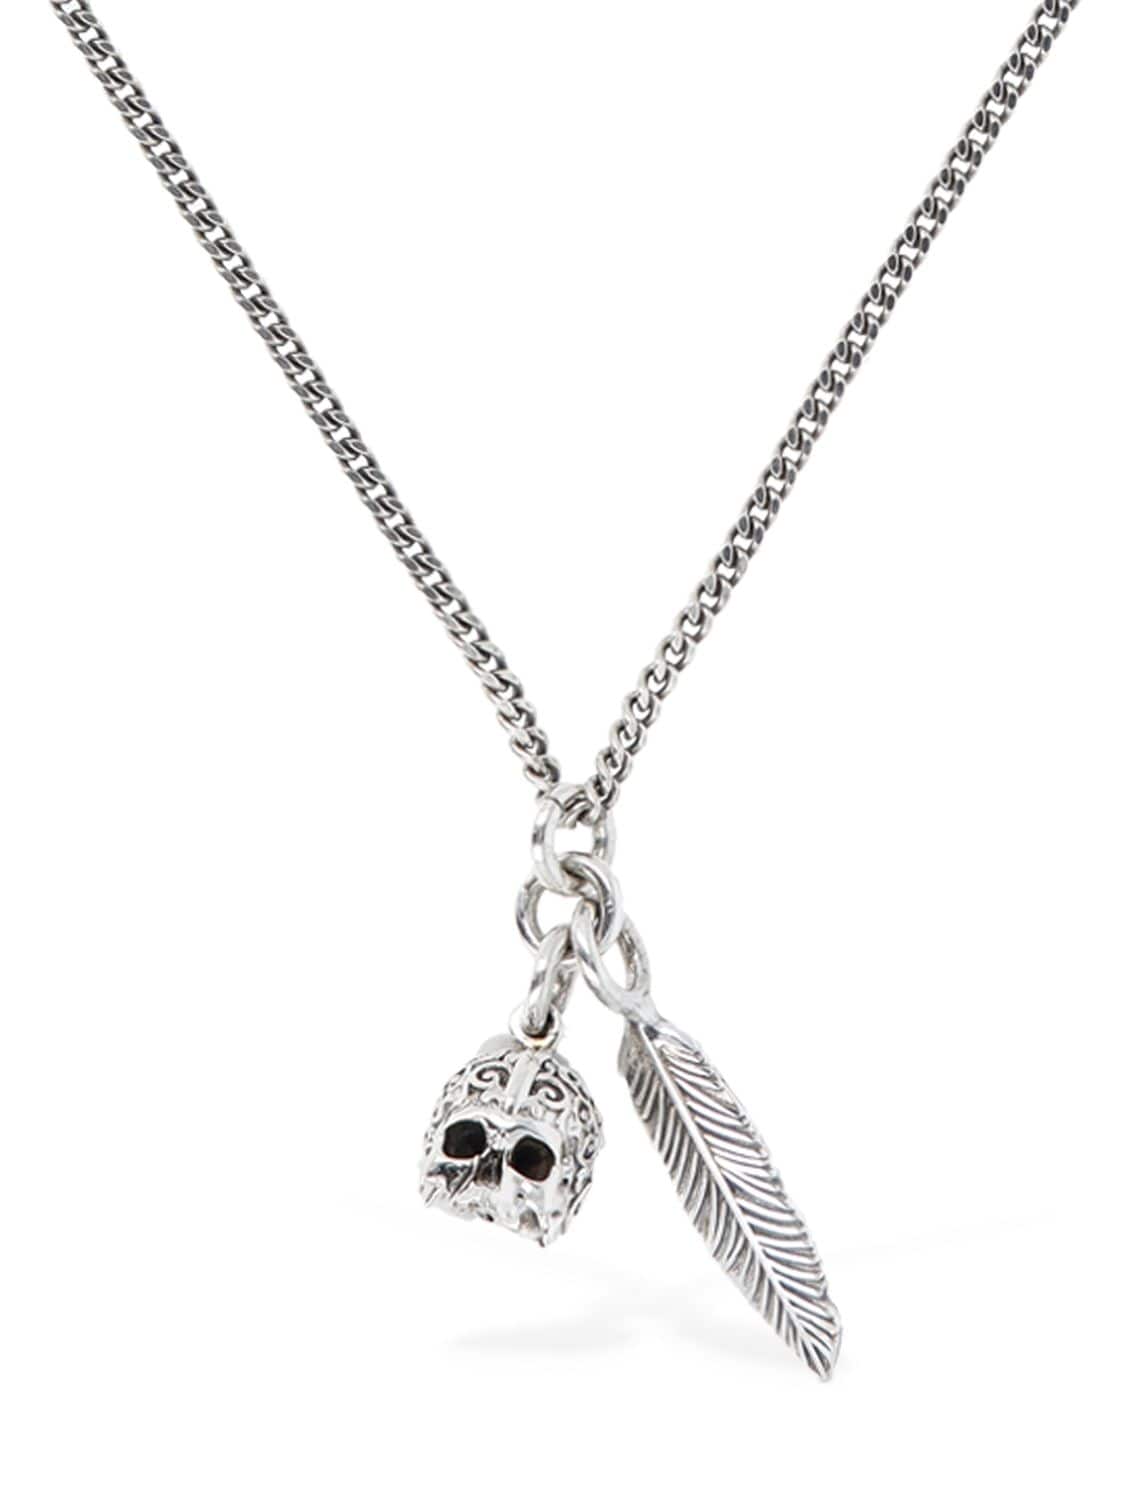 Image of Feather & Skull Charm Necklace